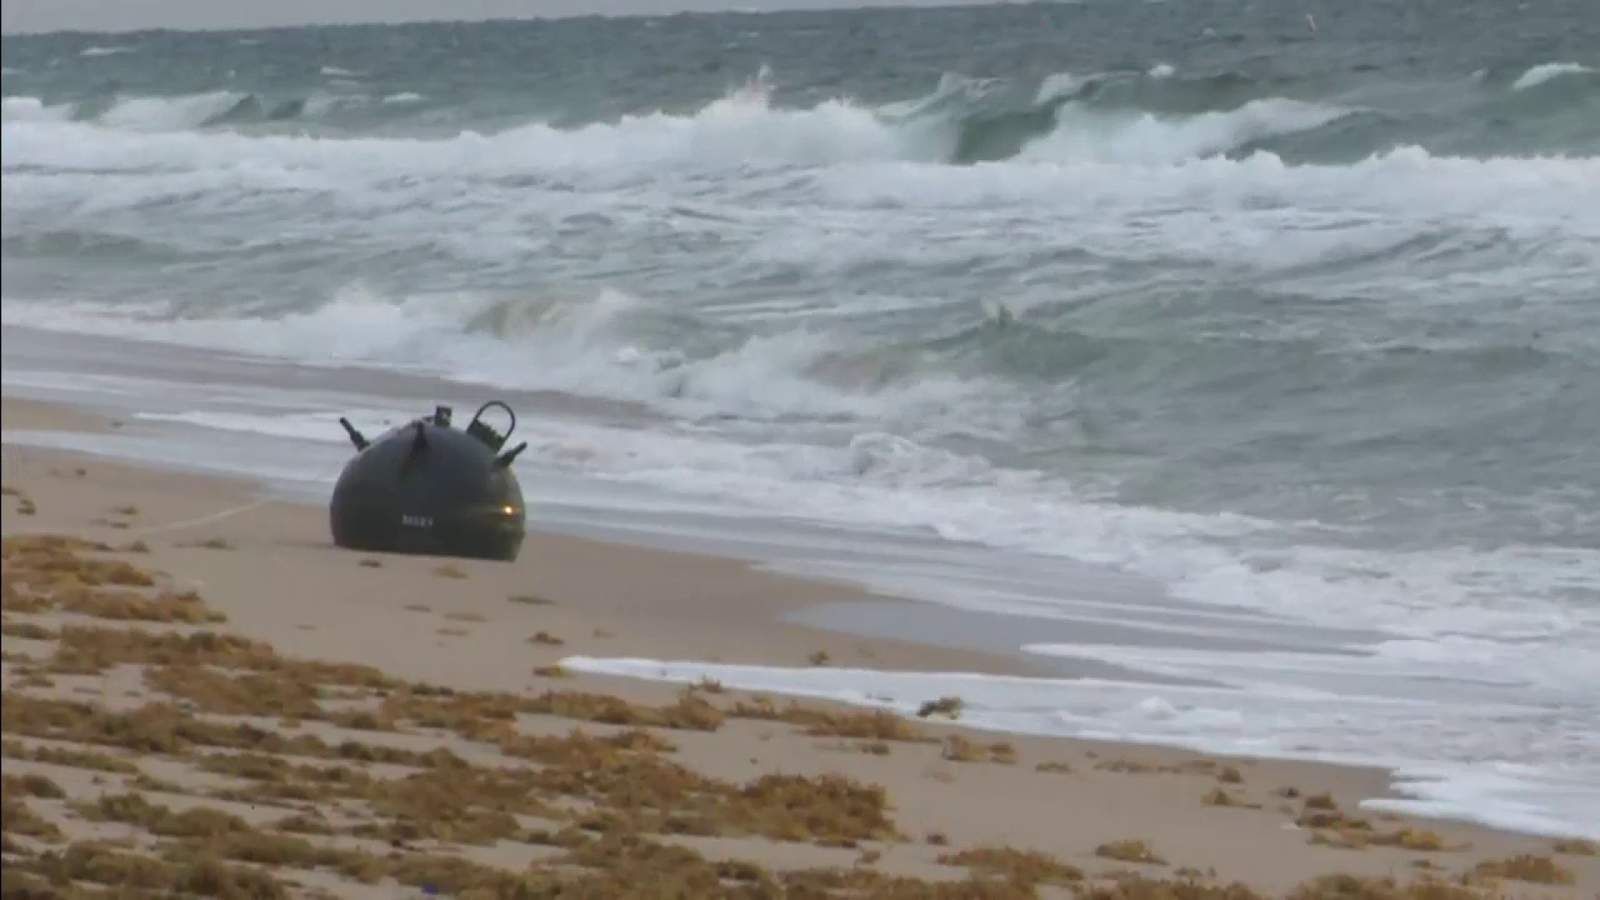 Navy mine washed ashore in Lauderdale-by-the-Sea